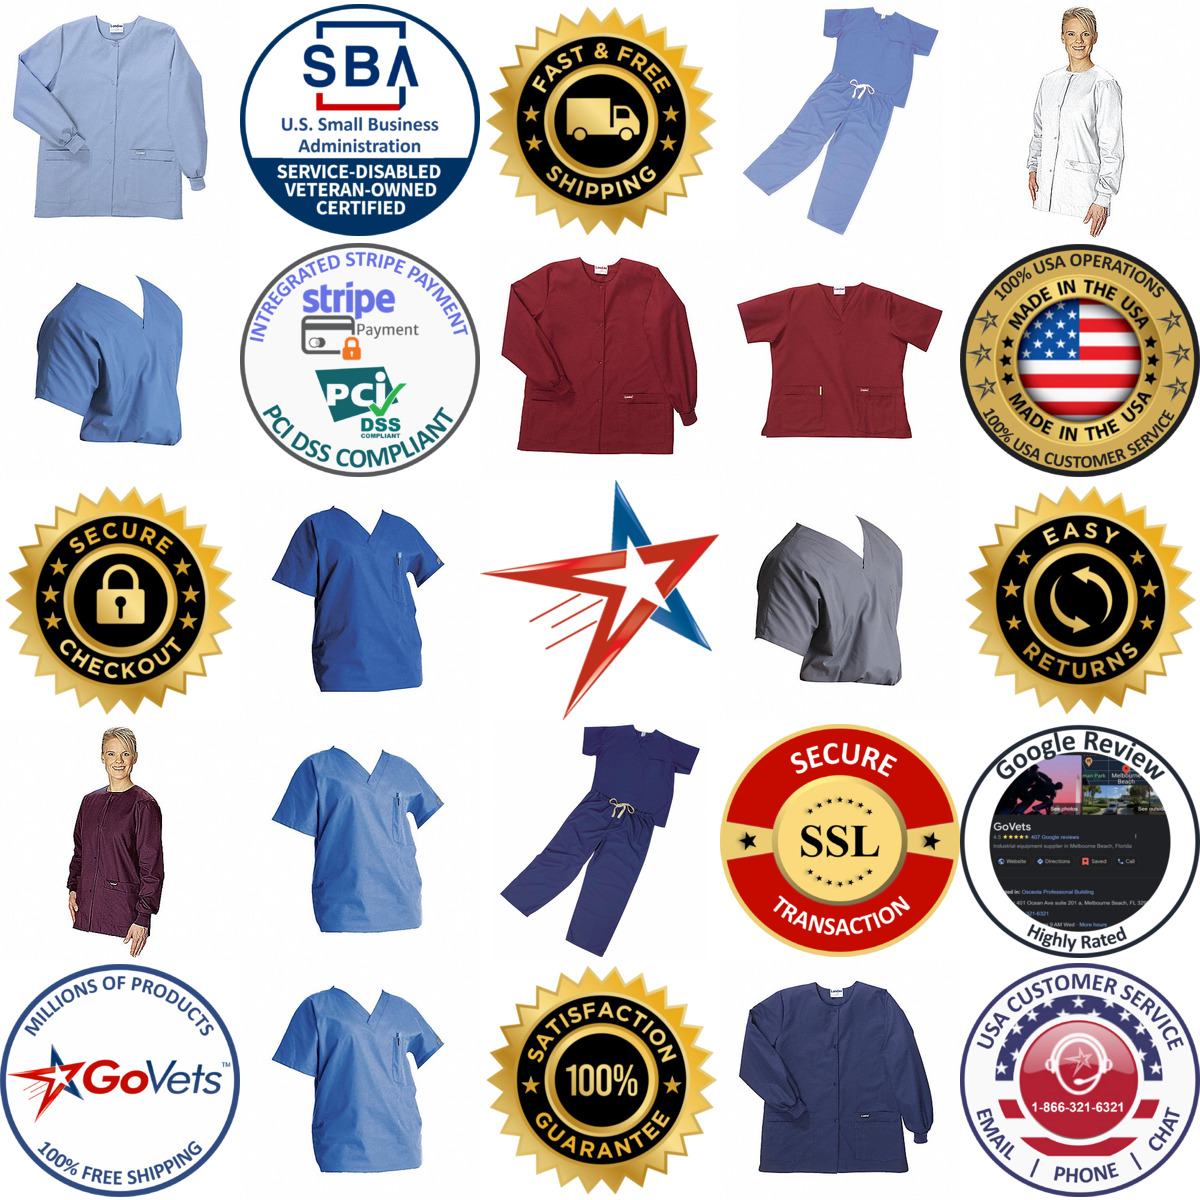 A selection of Scrub Tops products on GoVets